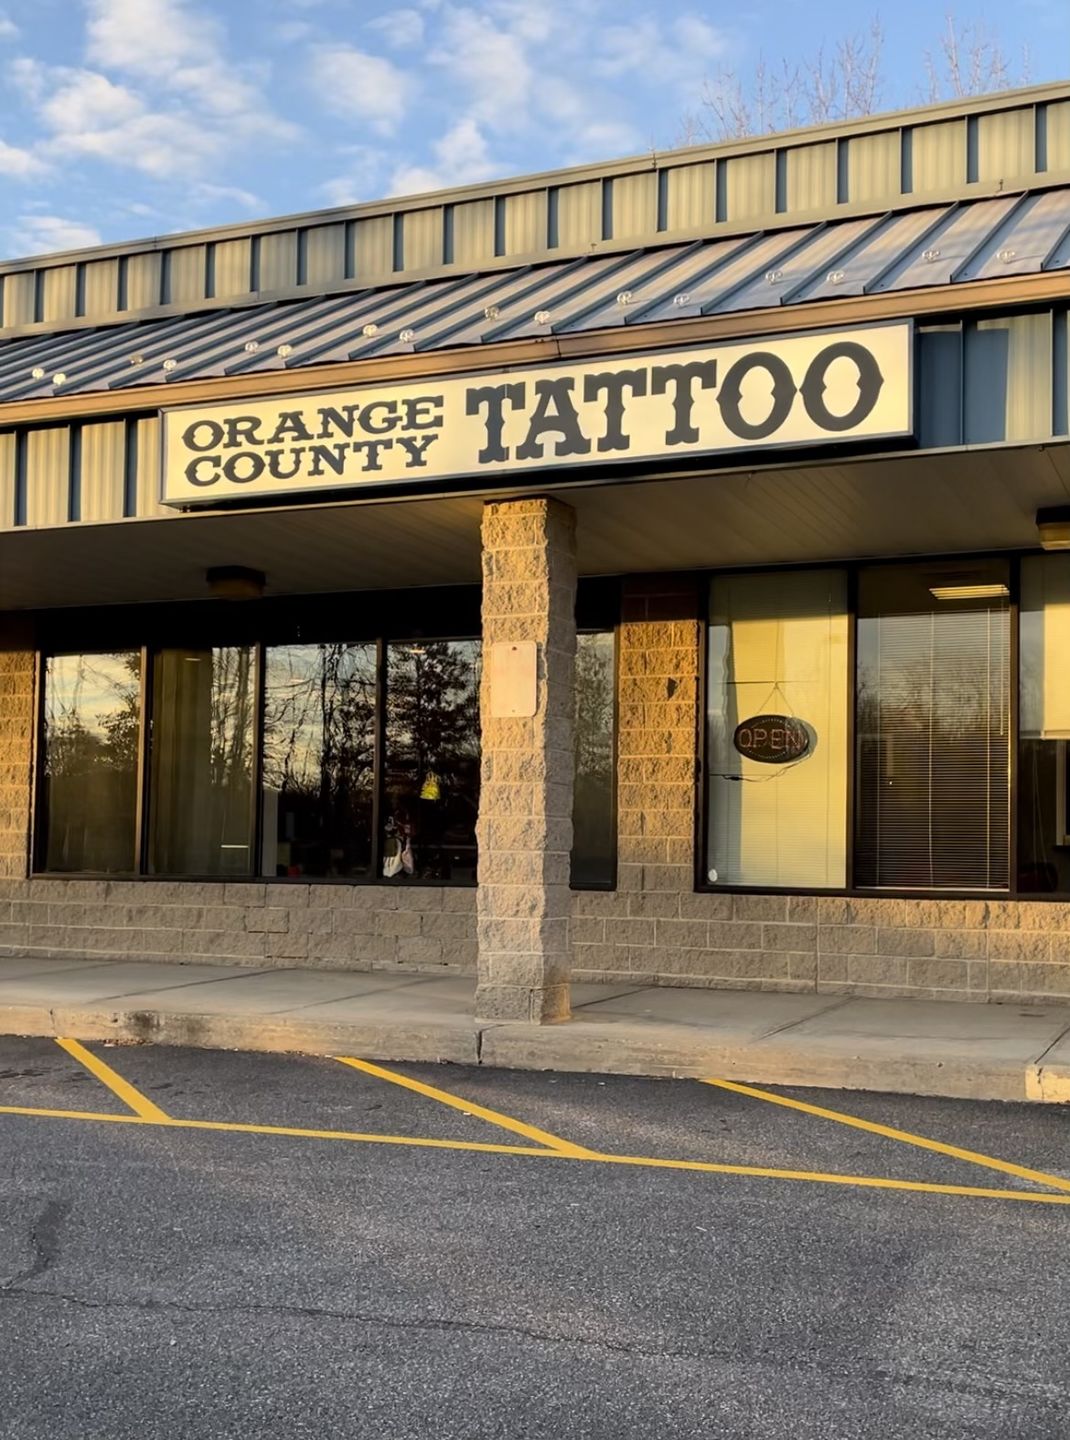 A guide to tattoo shops in Newport-Mesa – Orange County Register